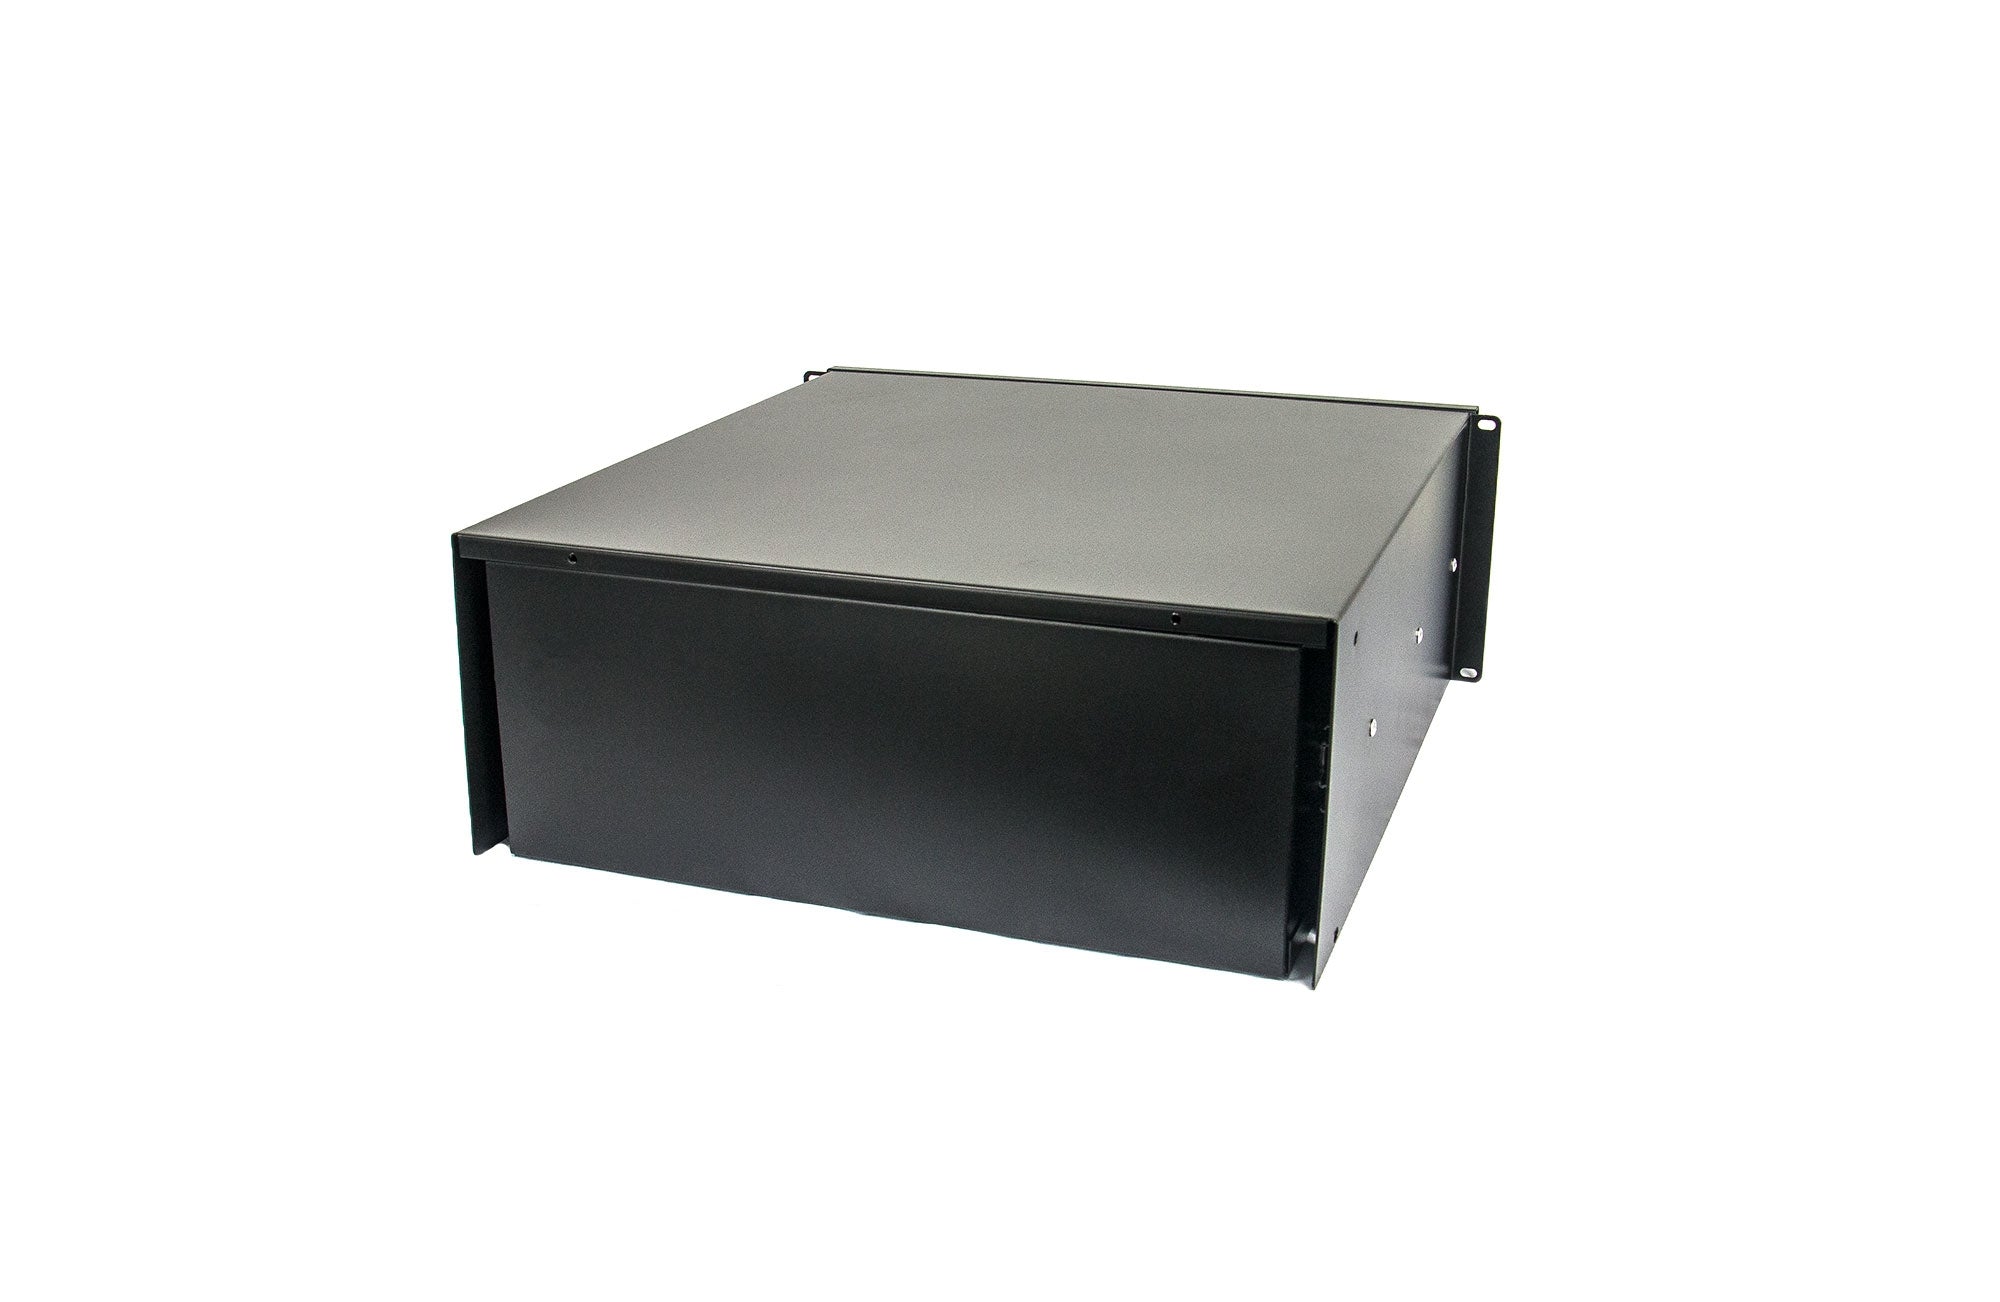 HYC-4UD Drawer with Cubed Foam Insert